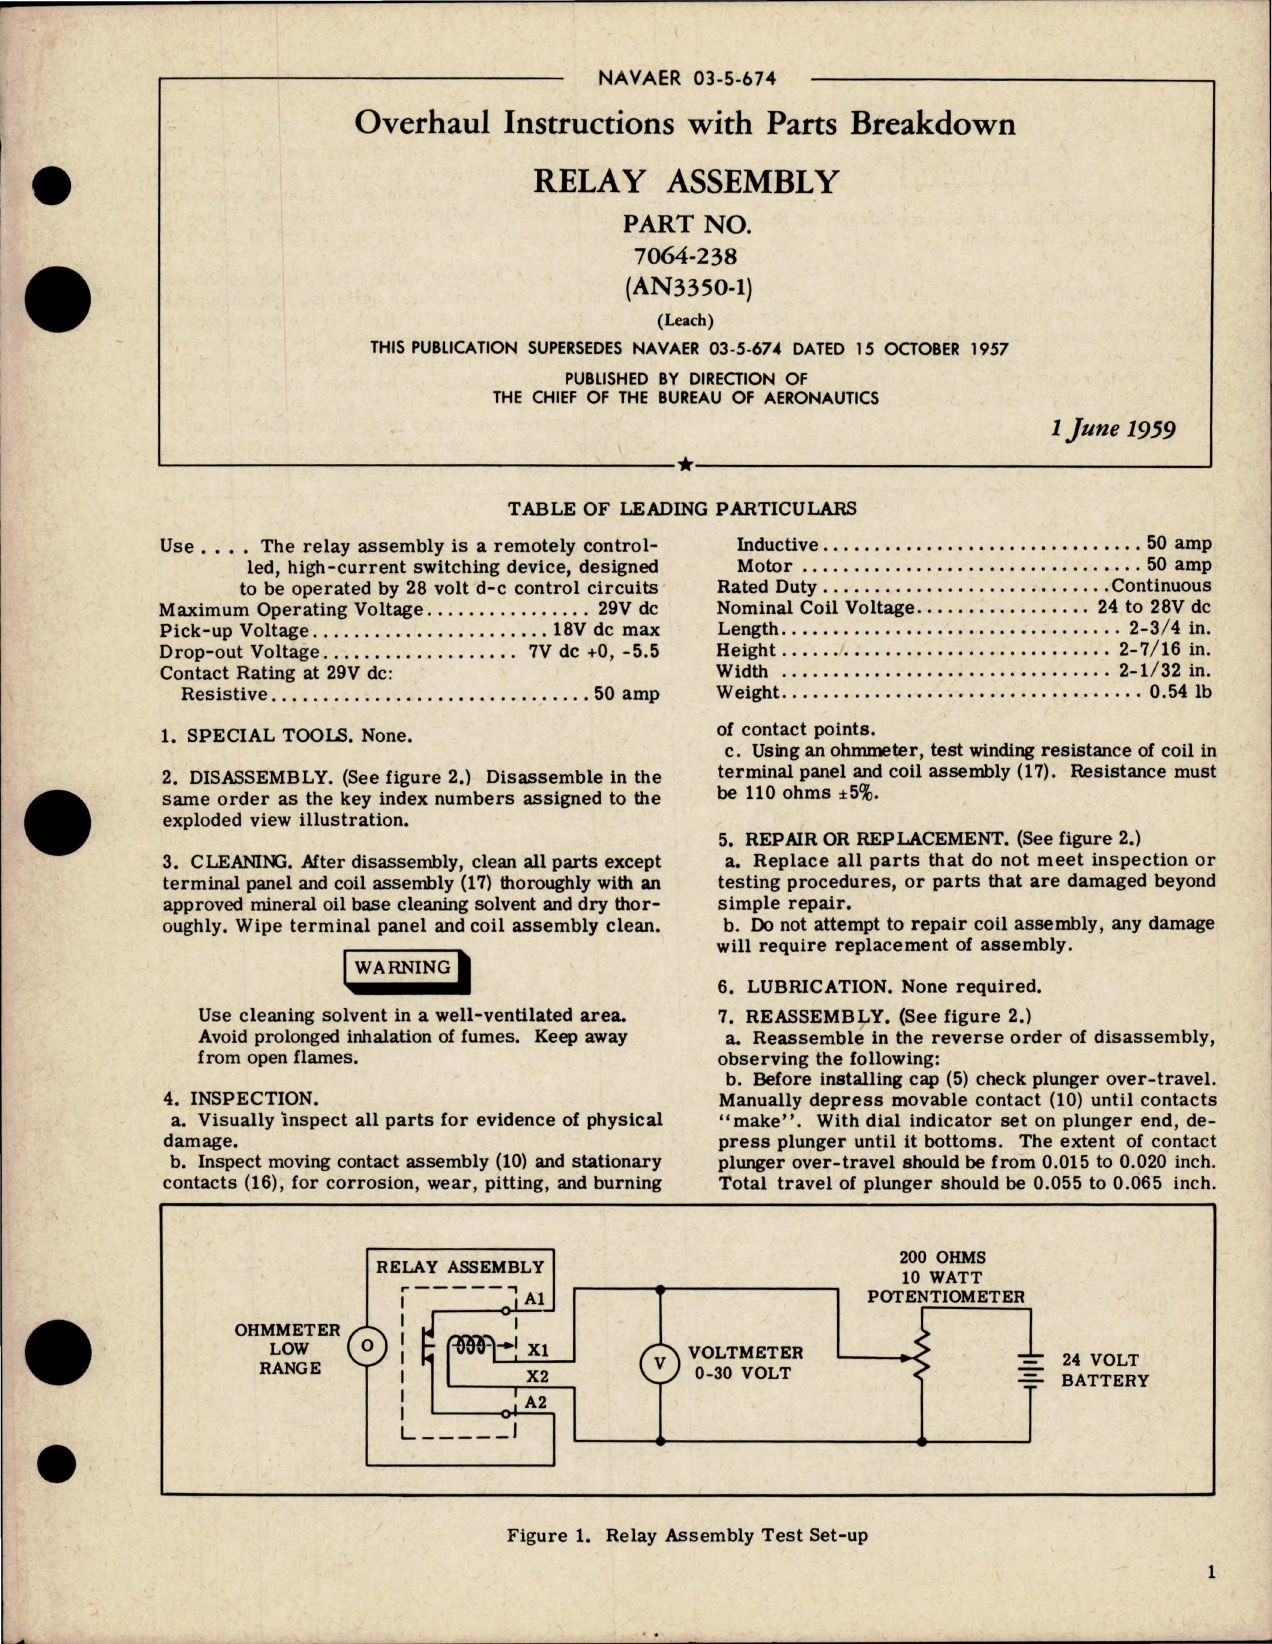 Sample page 1 from AirCorps Library document: Overhaul Instructions with Parts Breakdown for Relay Assembly - Part 7064-238 - AN3350-1 